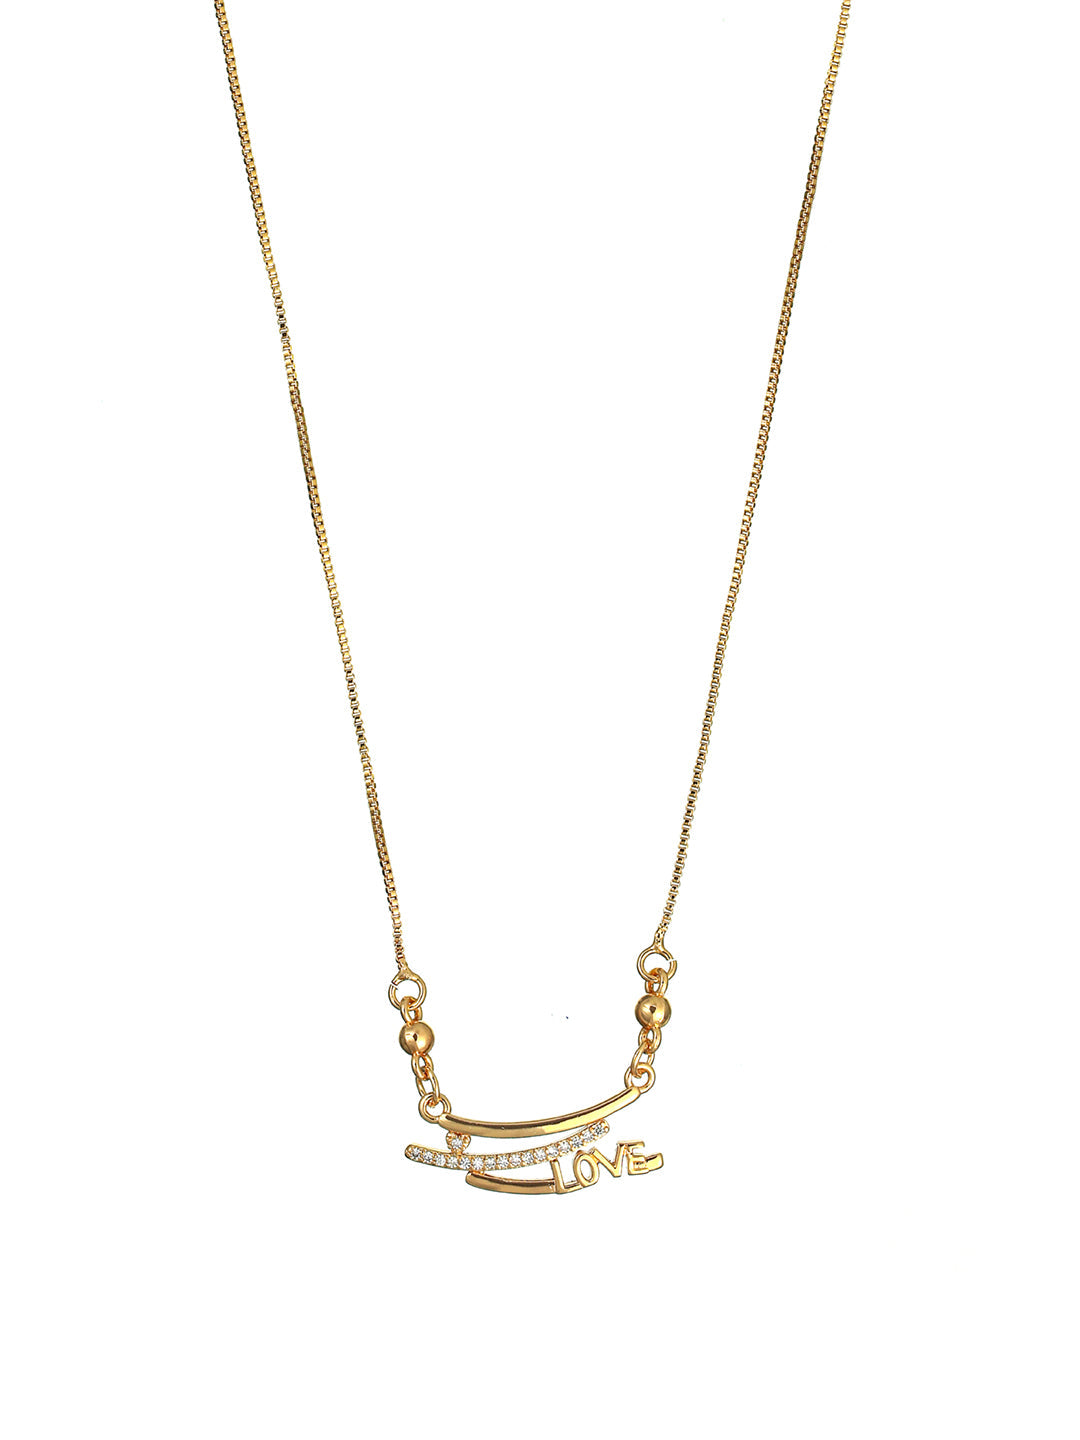 Love American Diamond Gold Plated Necklace - NOZ2TOZ